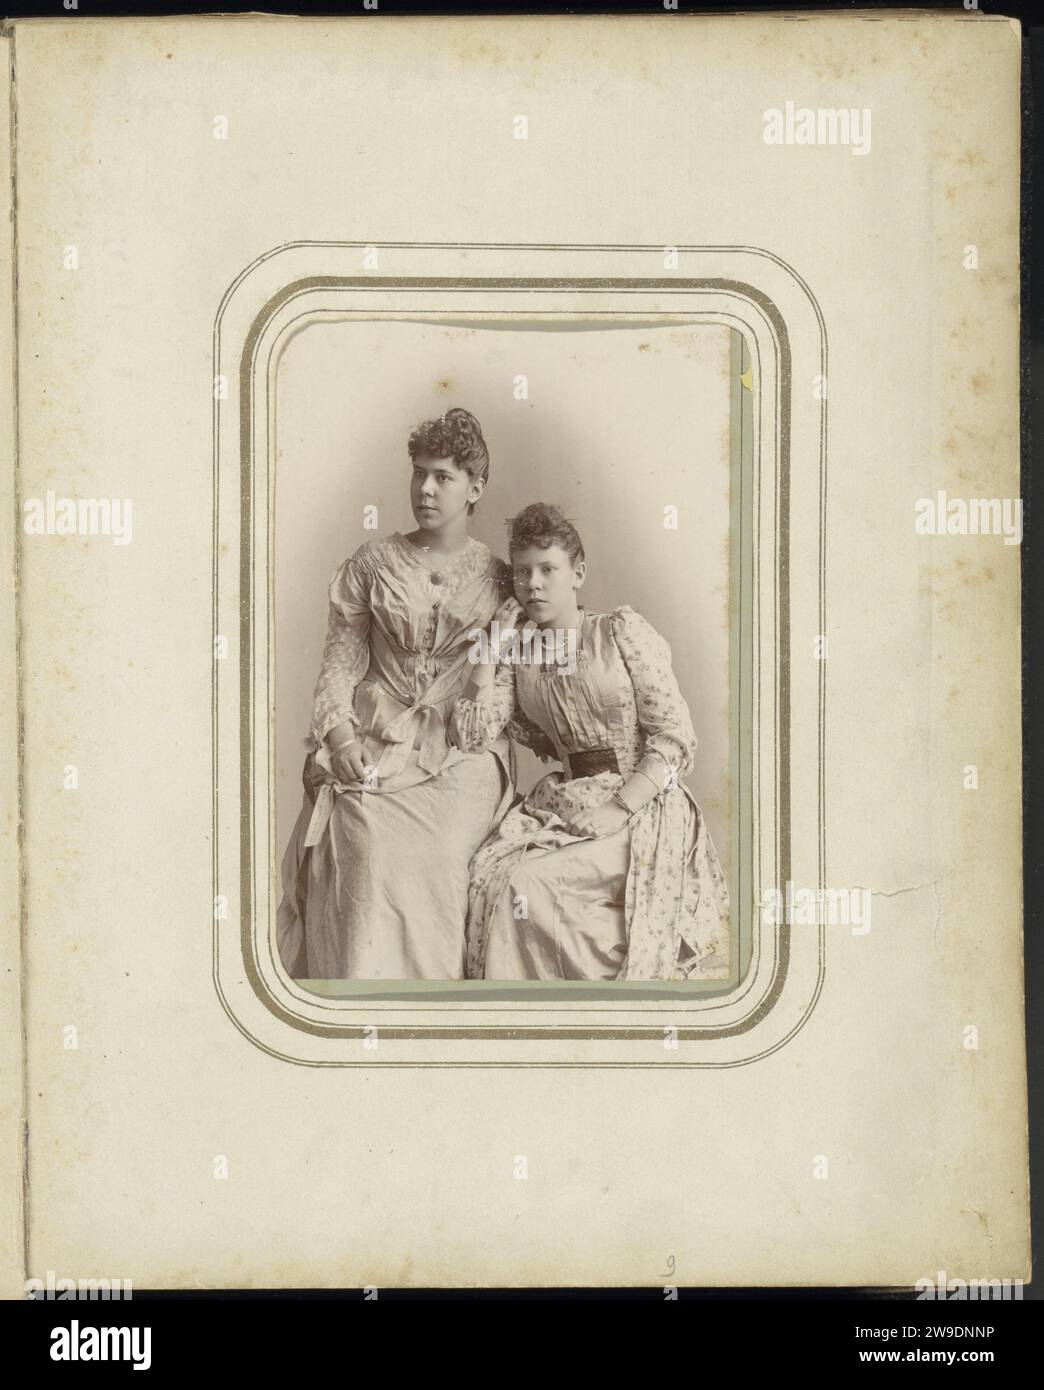 Portrait of two women in dresses, 1885 - 1924 cabinet photograph Part of Family Album of H.W.F. Ligtenberg and L.M. Swart with 149 photos and cartes-de-visiting. Netherlands cardboard. photographic support  historical persons. family, relationship, descent. dress, gown. styles of hairdress - AA -  women Netherlands. Batavia Stock Photo